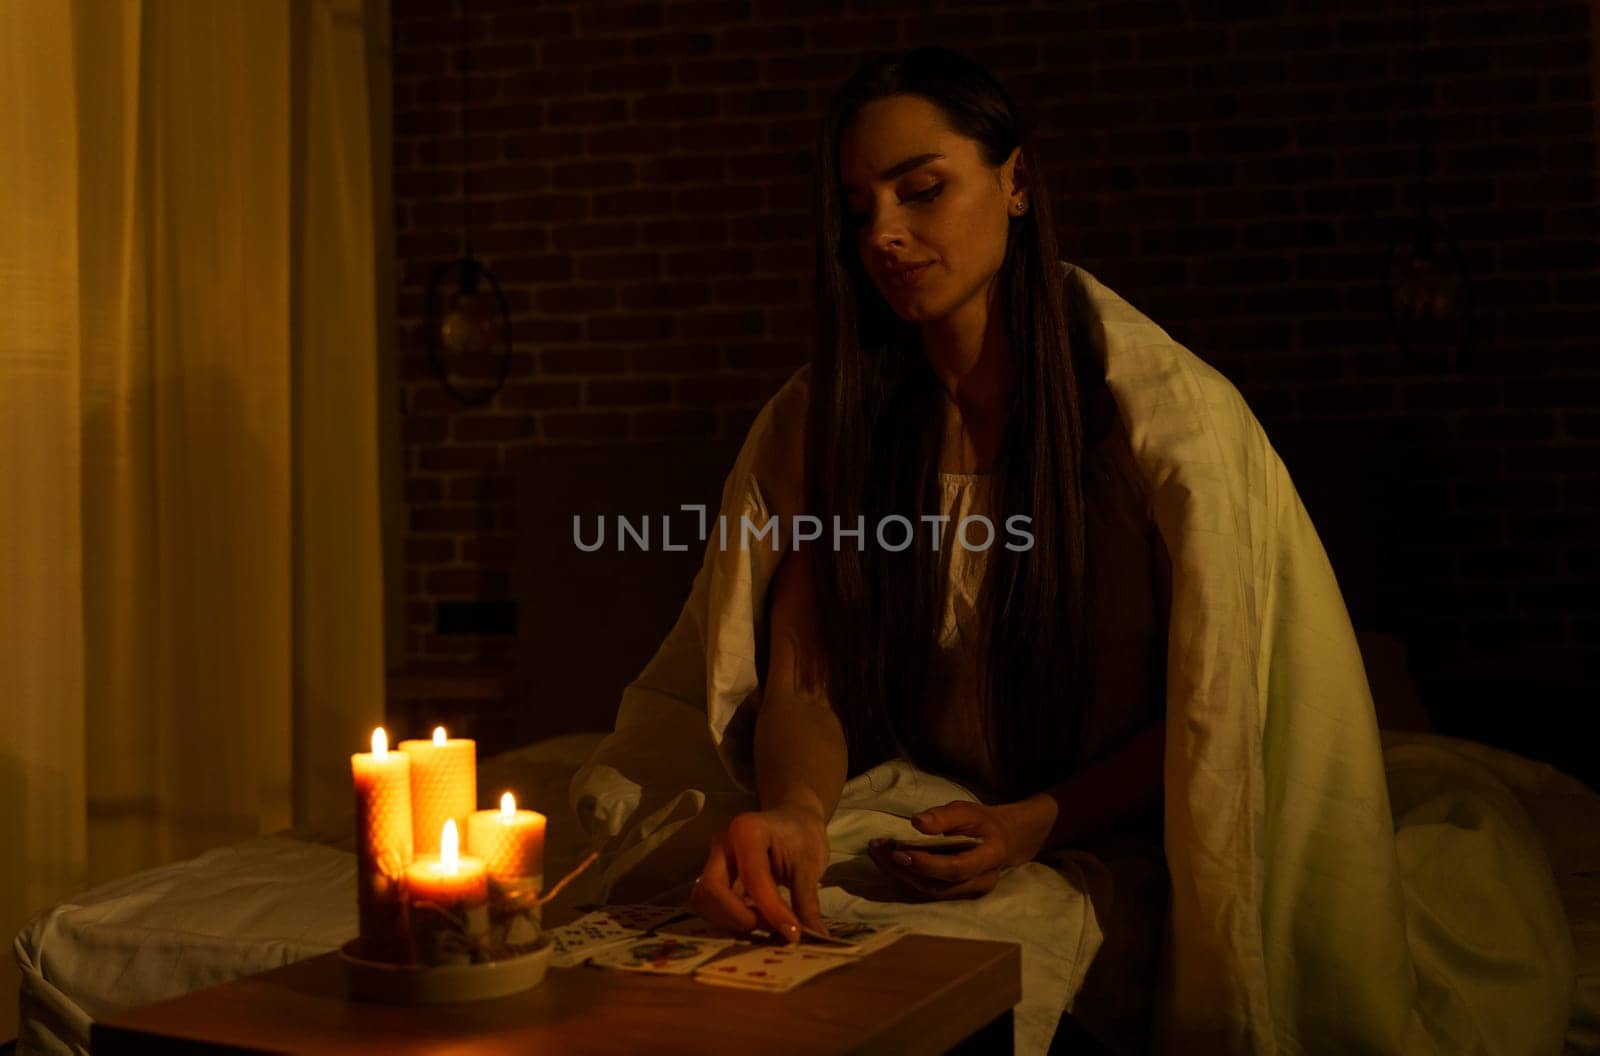 A woman reads cards in the dark by the light of burning candles. by Sd28DimoN_1976